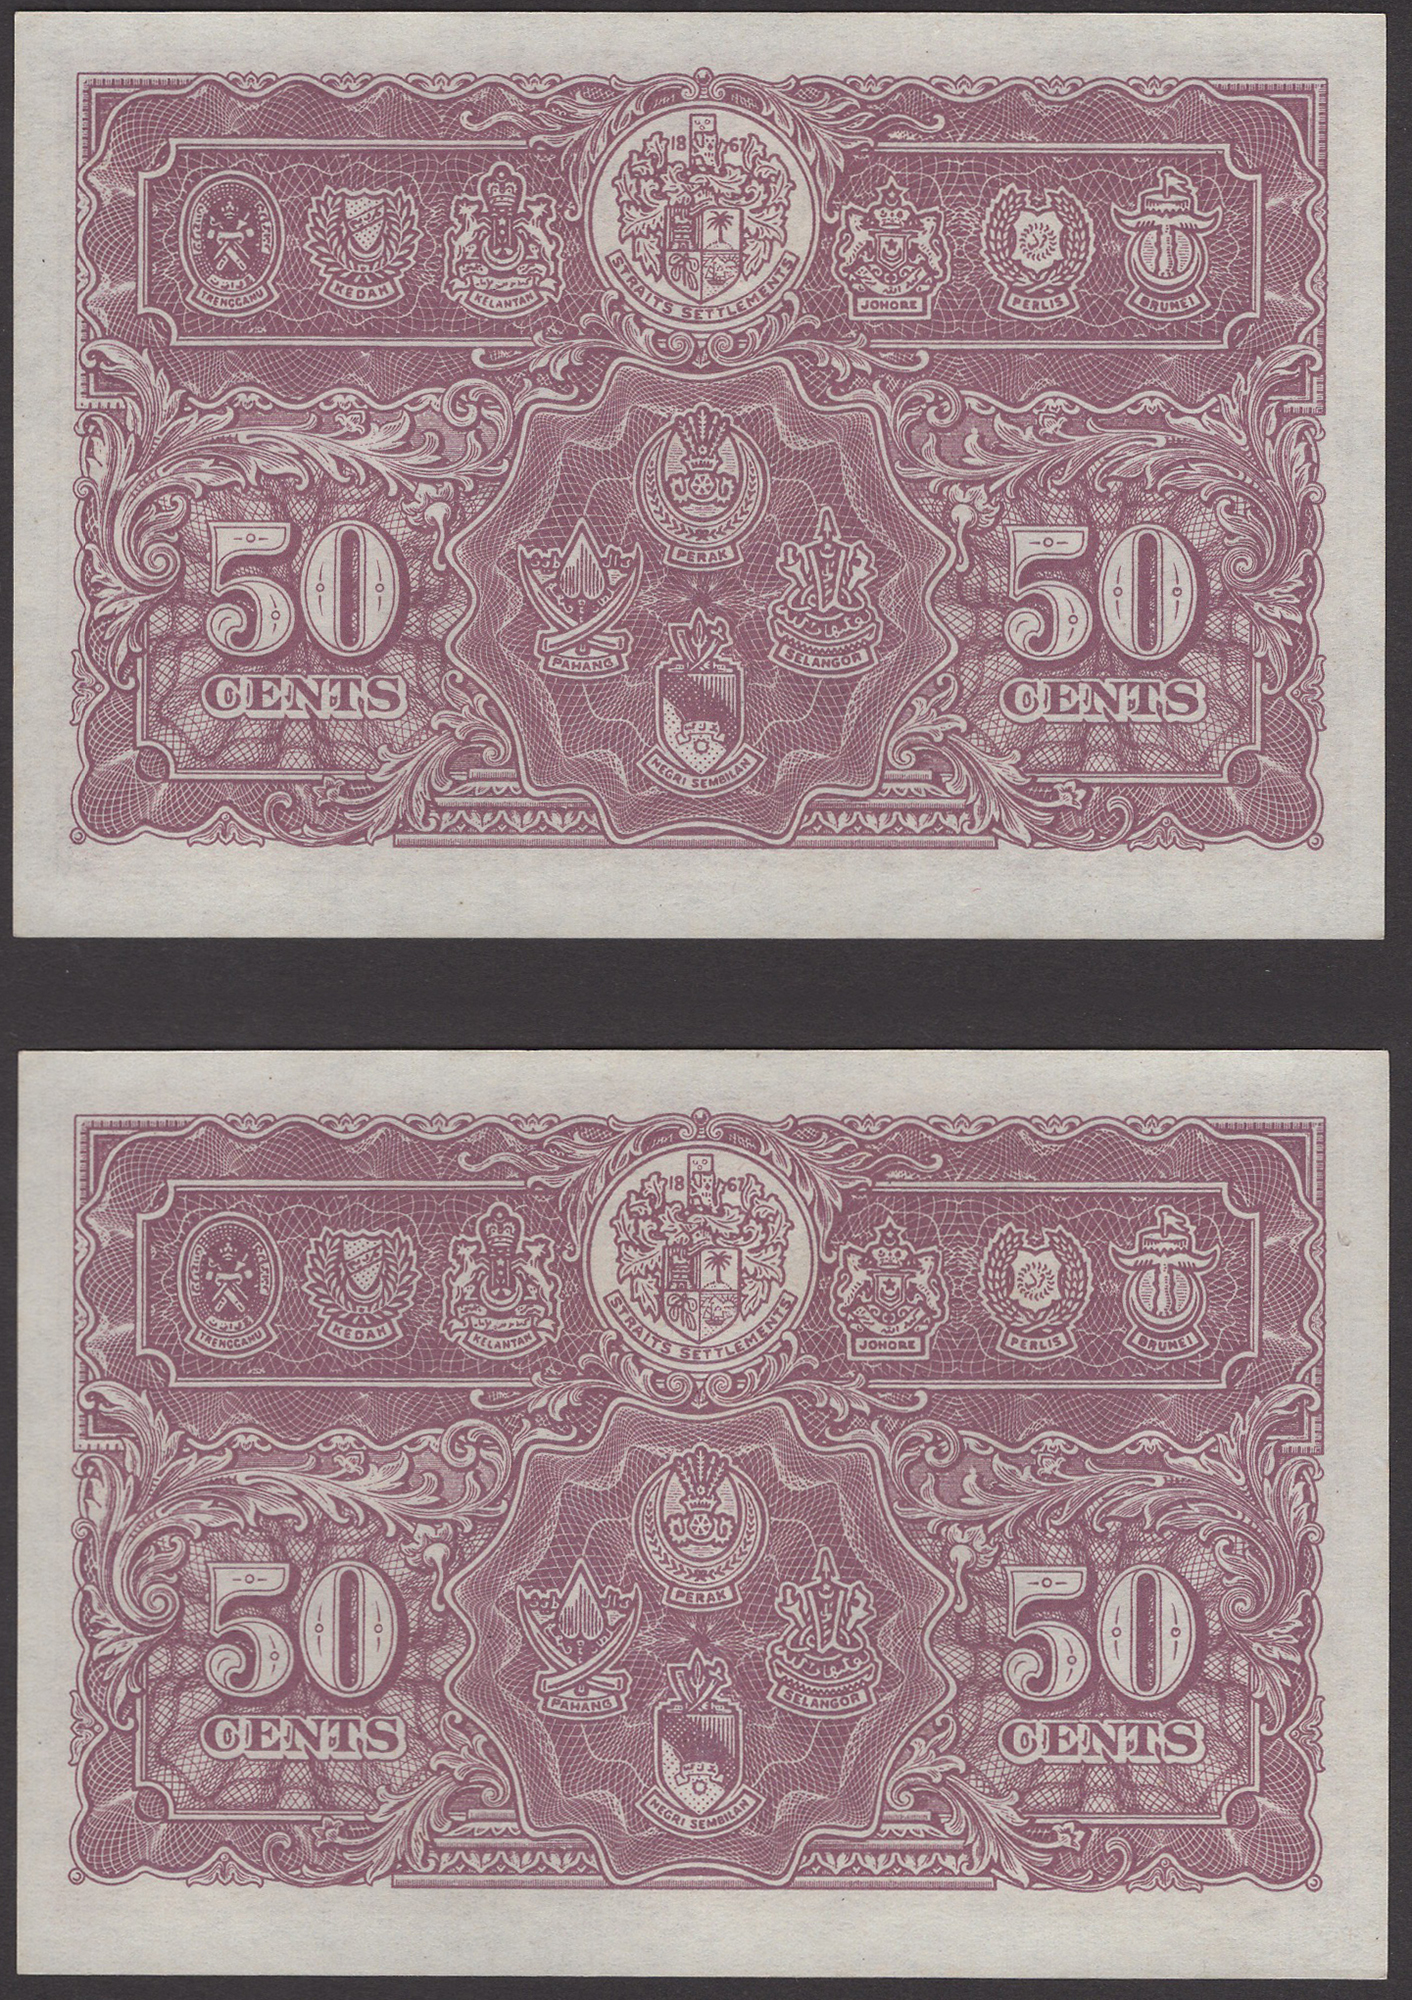 Board of Commissioners of Currency Malaya, 50 Cents (2), 1 July 1941, serial numbers A/29... - Image 2 of 2